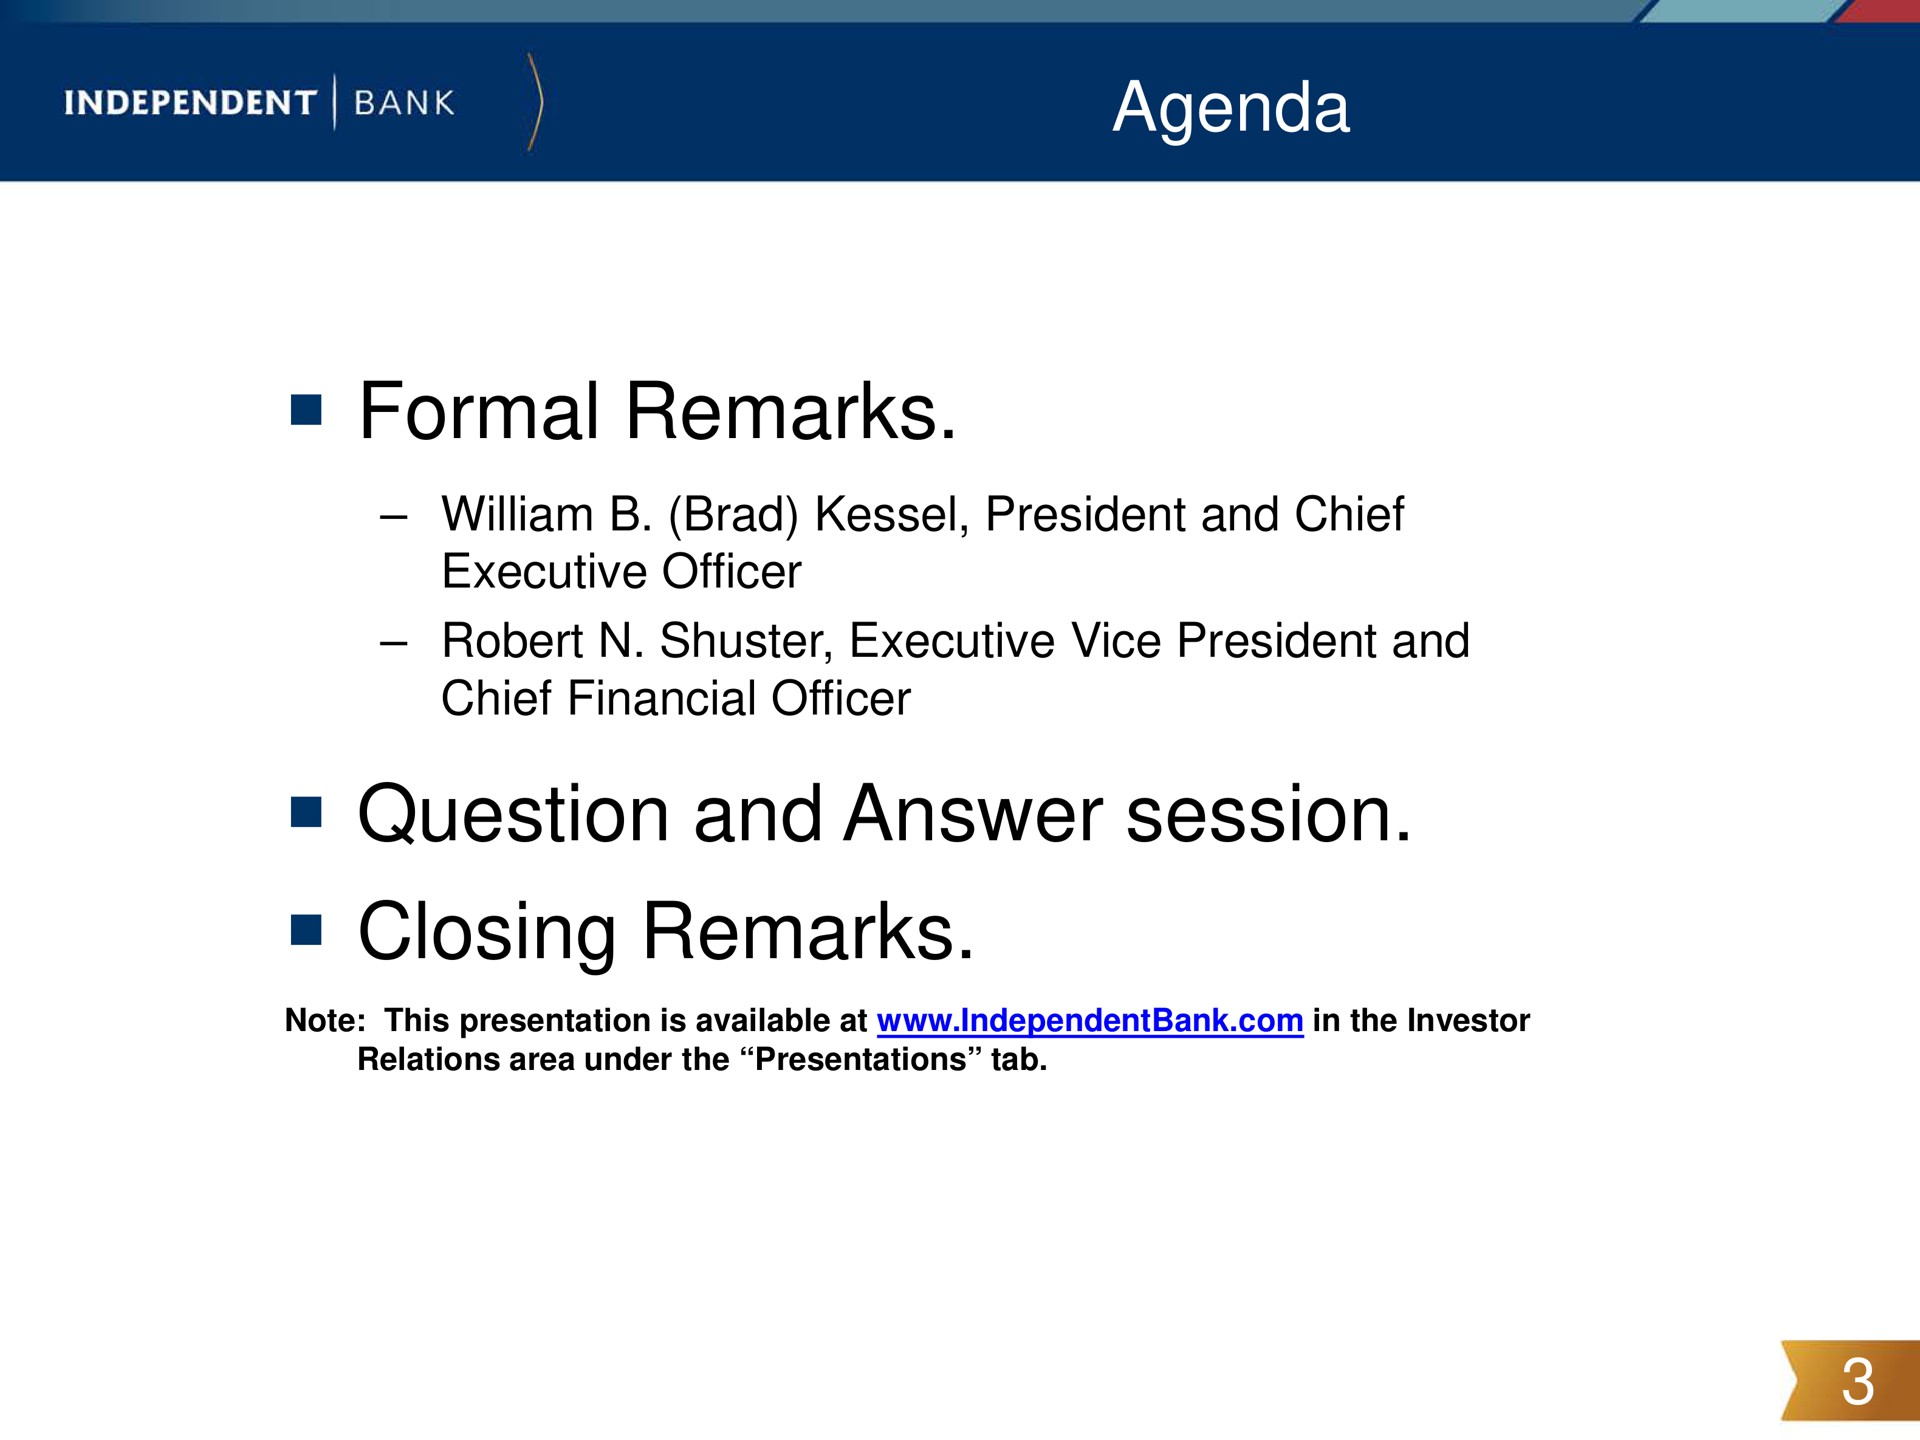 agenda formal remarks question and answer session closing remarks | Independent Bank Corp